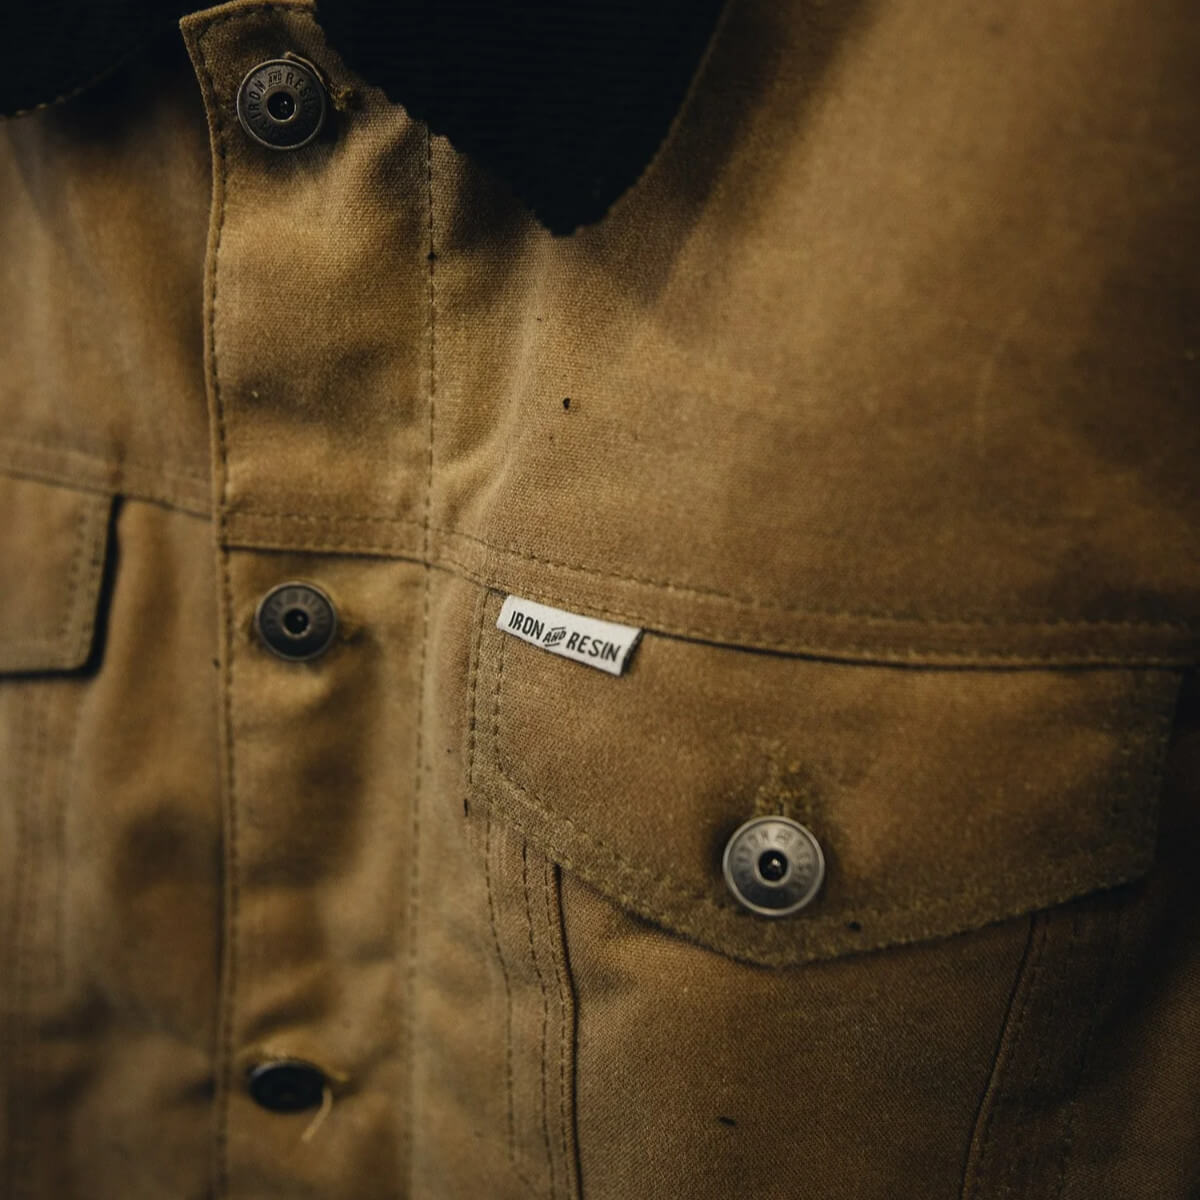 Iron and Resin The Scout Jacket | Trucker Jacket